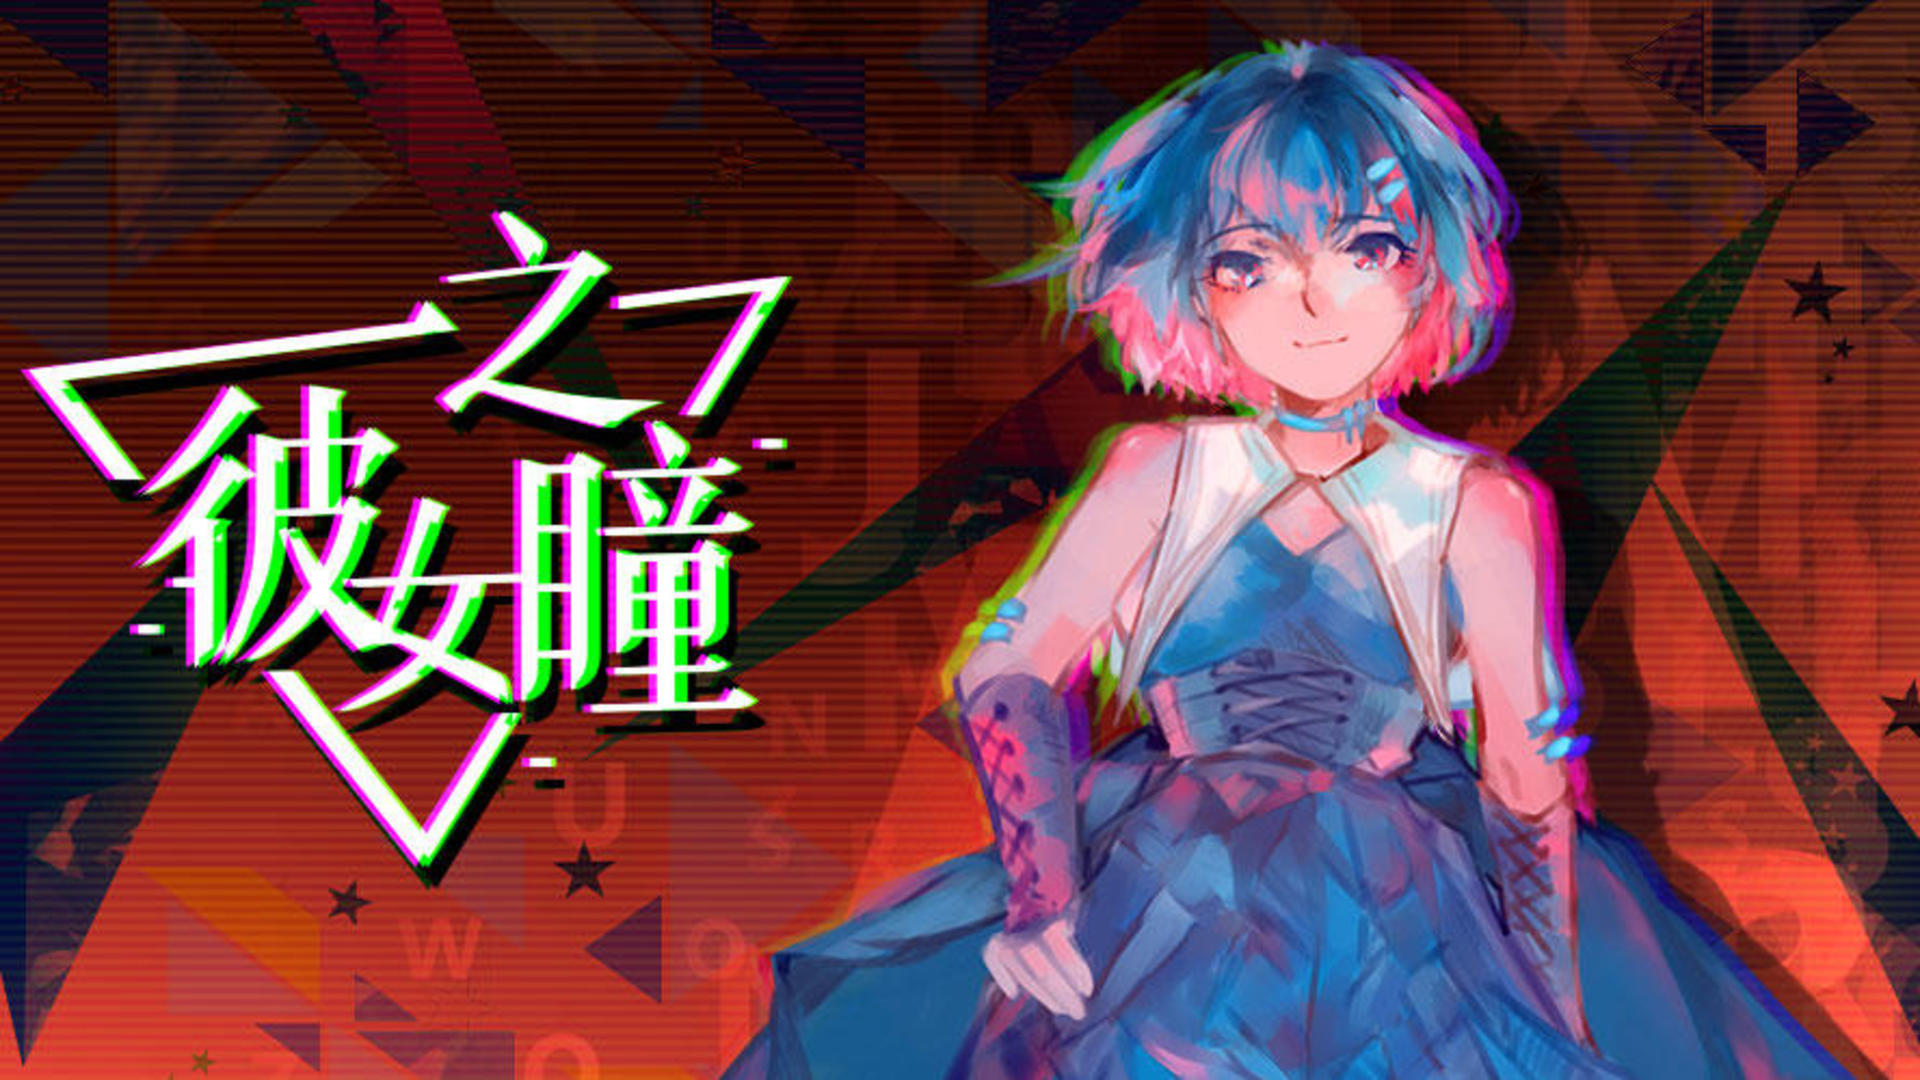 Banner of In Her Eyes 彼女之瞳 